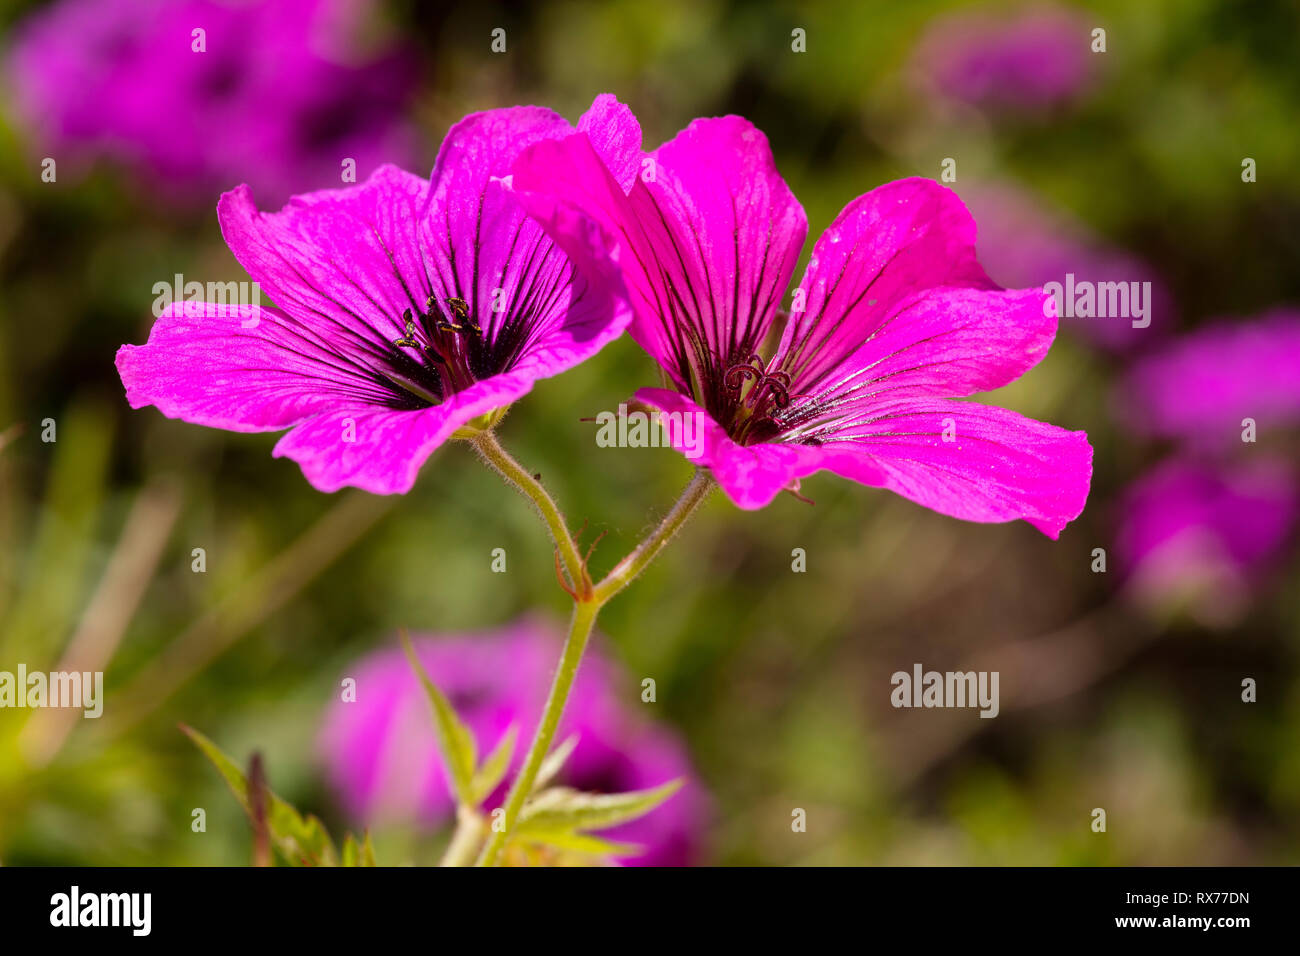 Armenian cranesbill (Geranium psilostemon), Additional-Rights-Clearance-Info-Not-Available Stock Photo